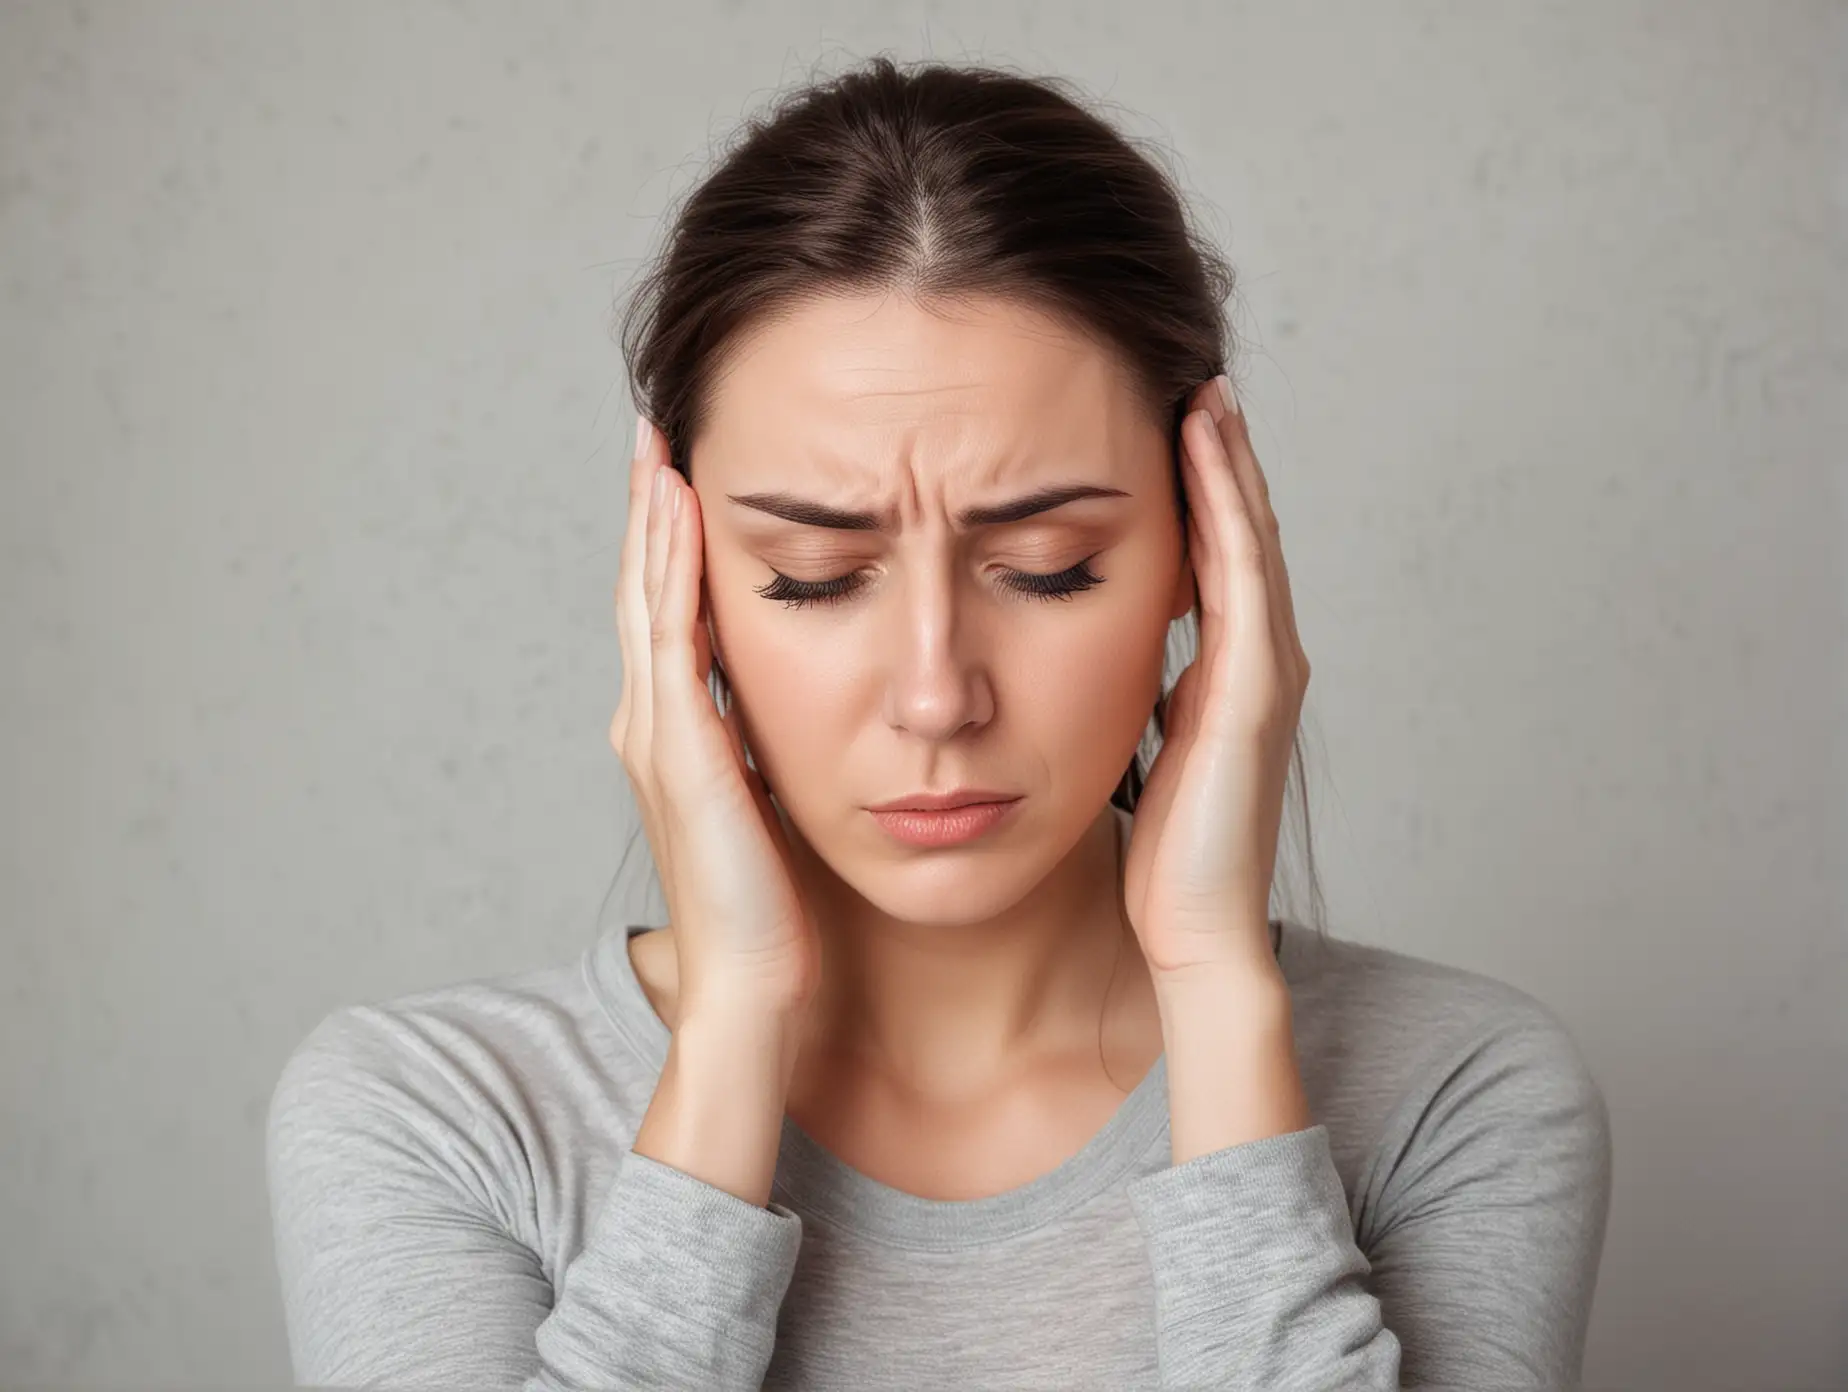 Stressed Woman Holding Her Head in Pain